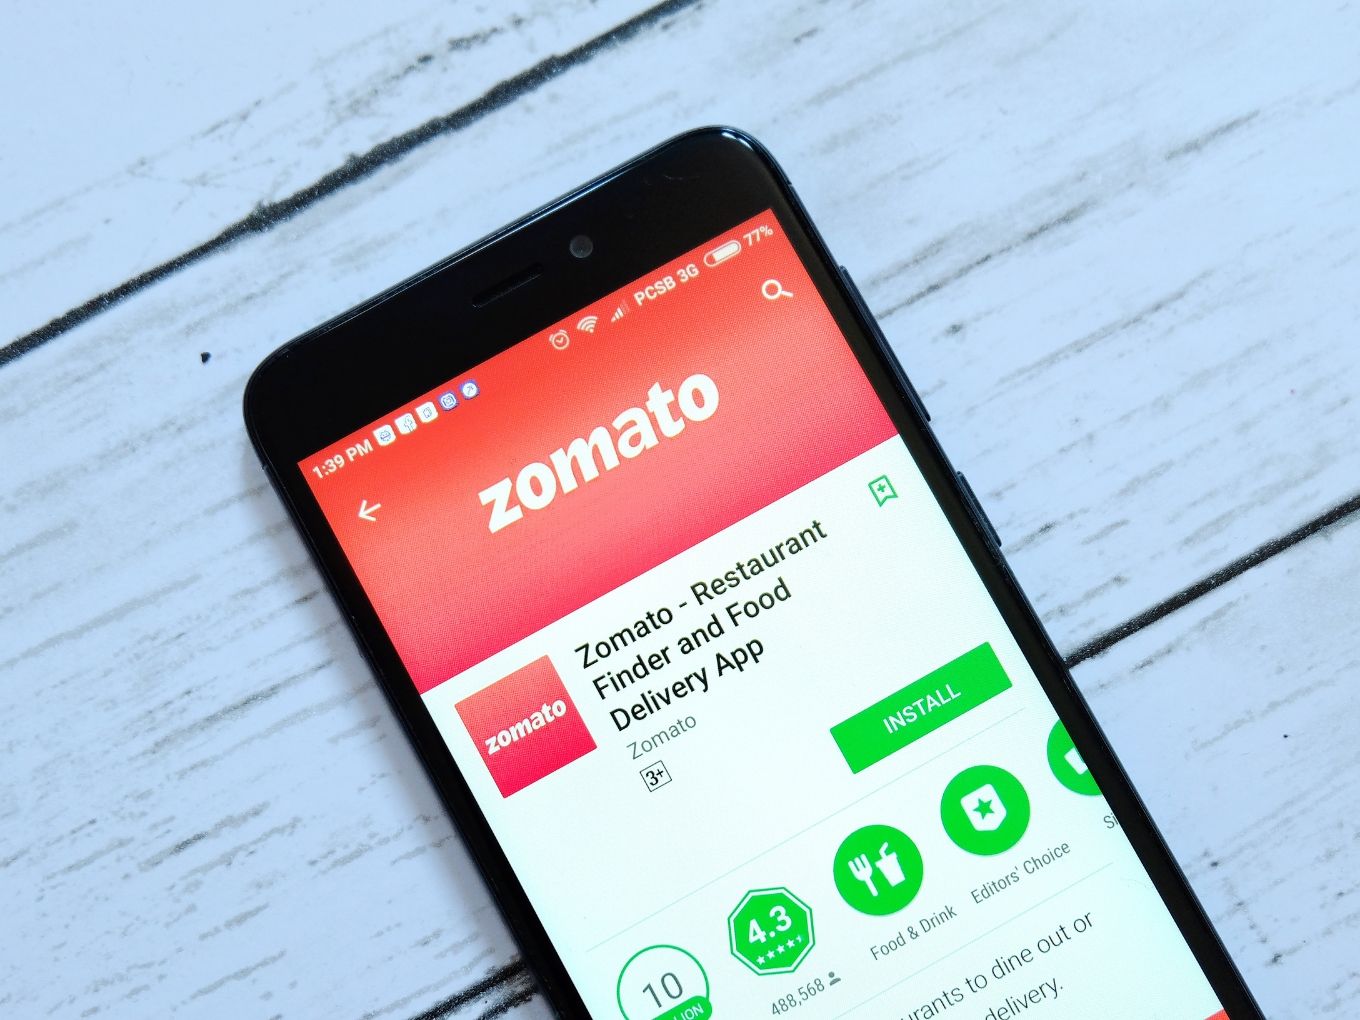 Zomato Layoffs: 540 Employees Let Go Within A Month Of First Round Firing